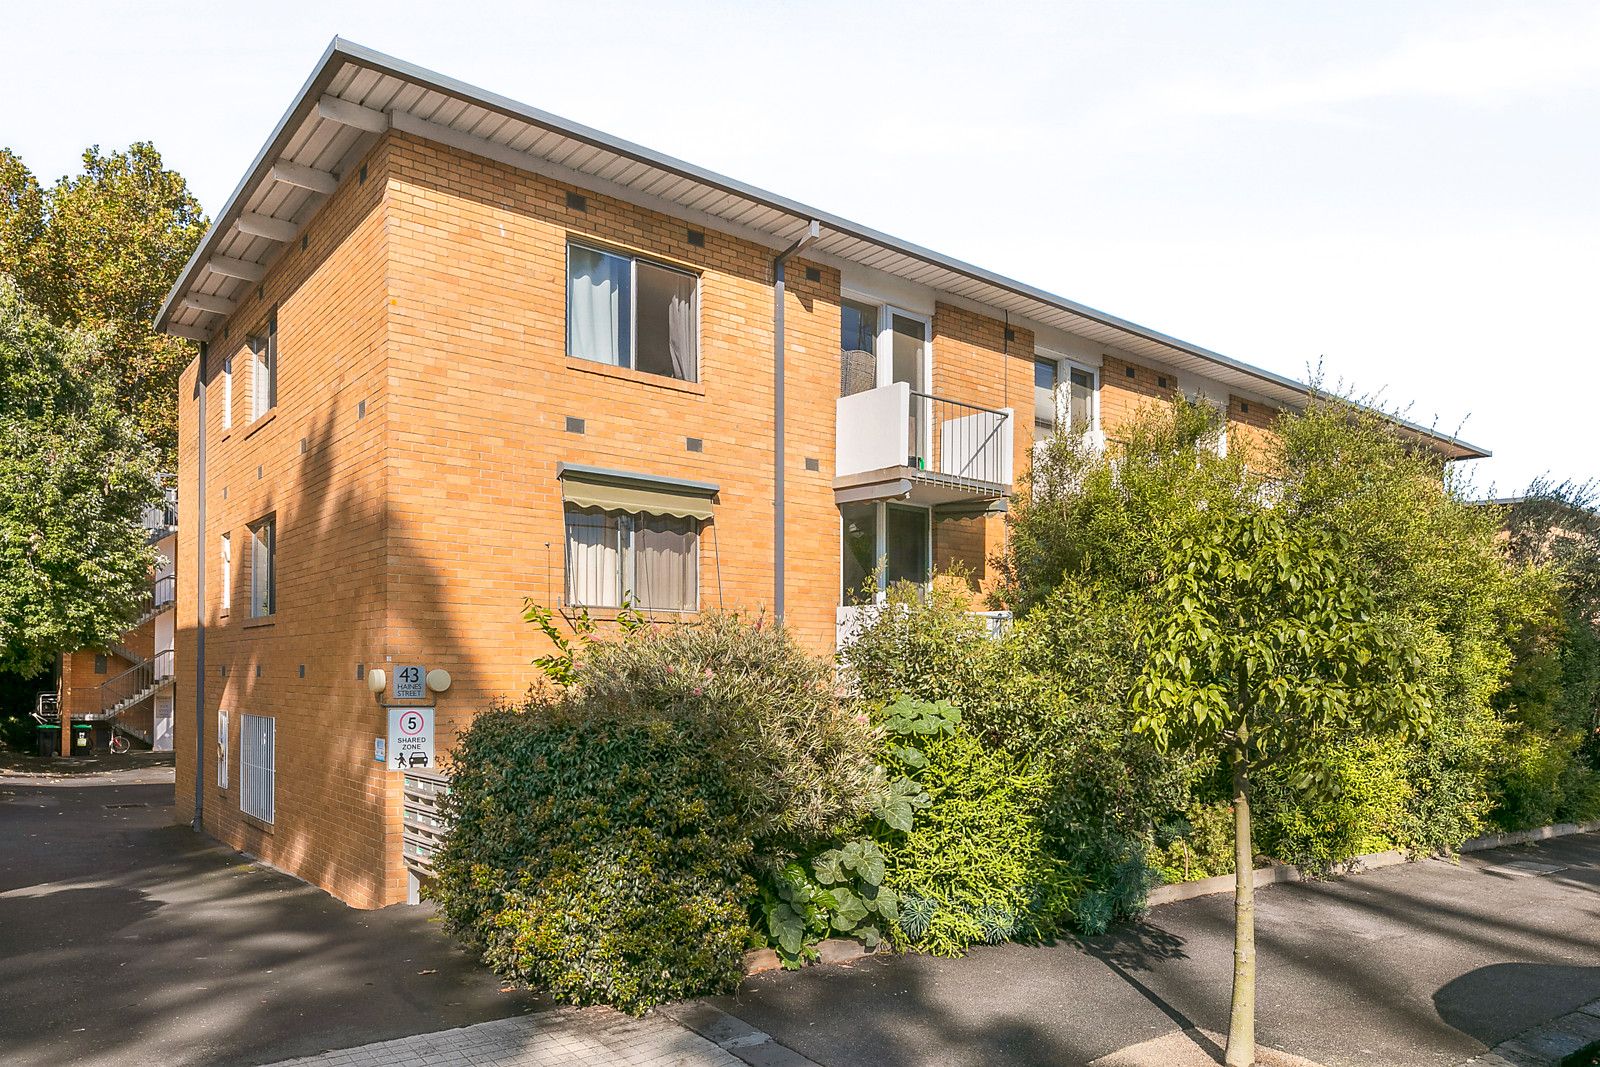 11/43 Haines Street, North Melbourne VIC 3051